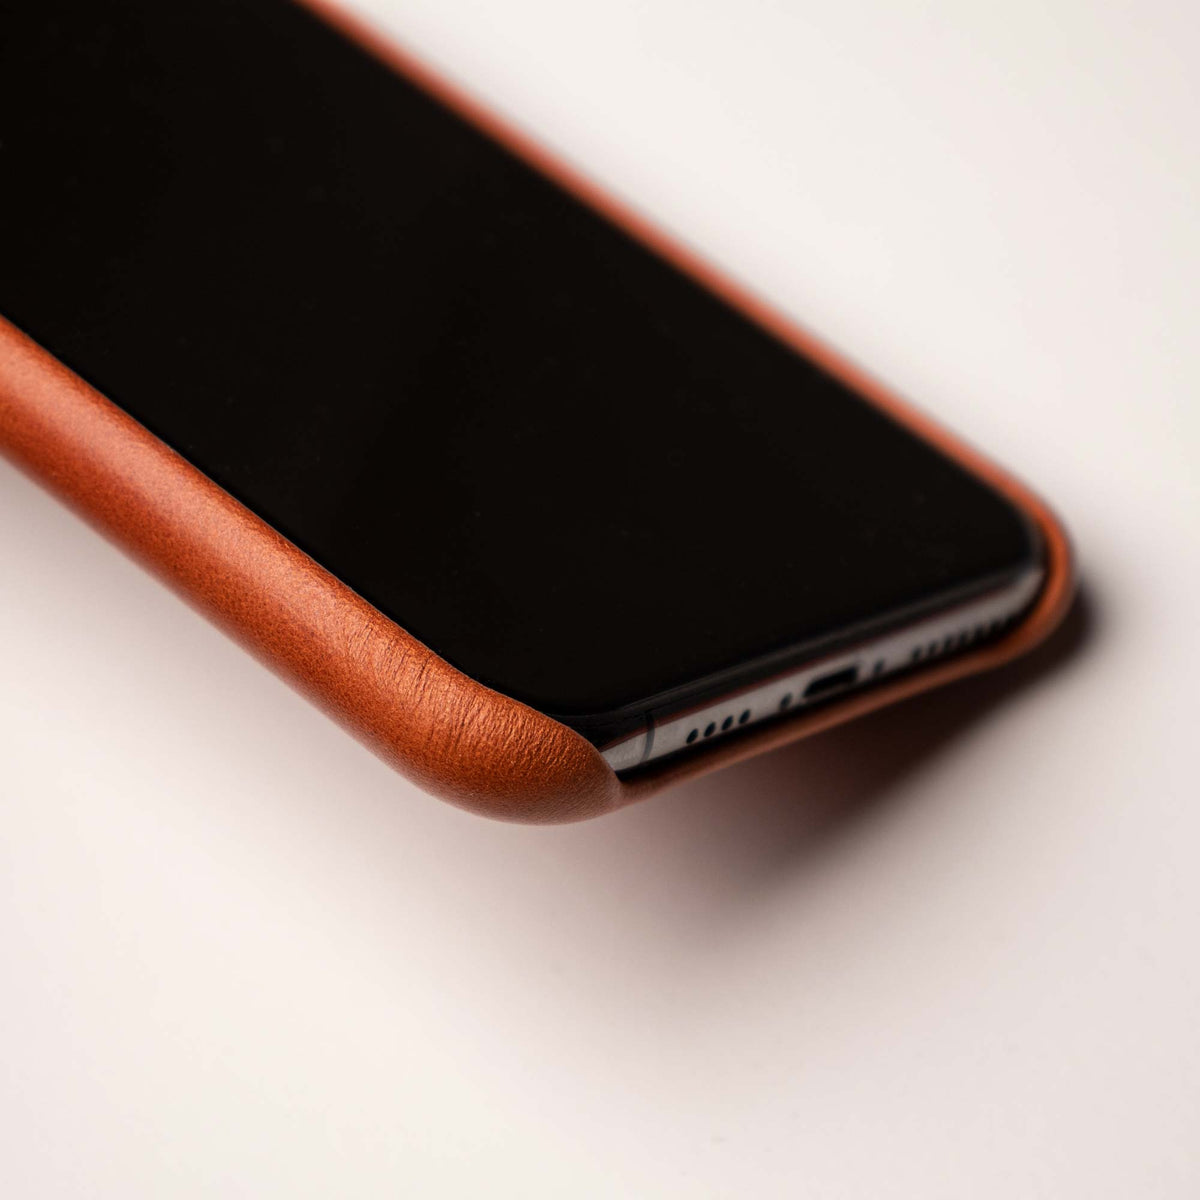 Leather iPhone Xs Max Shell Case - Saddle Brown - RYAN London